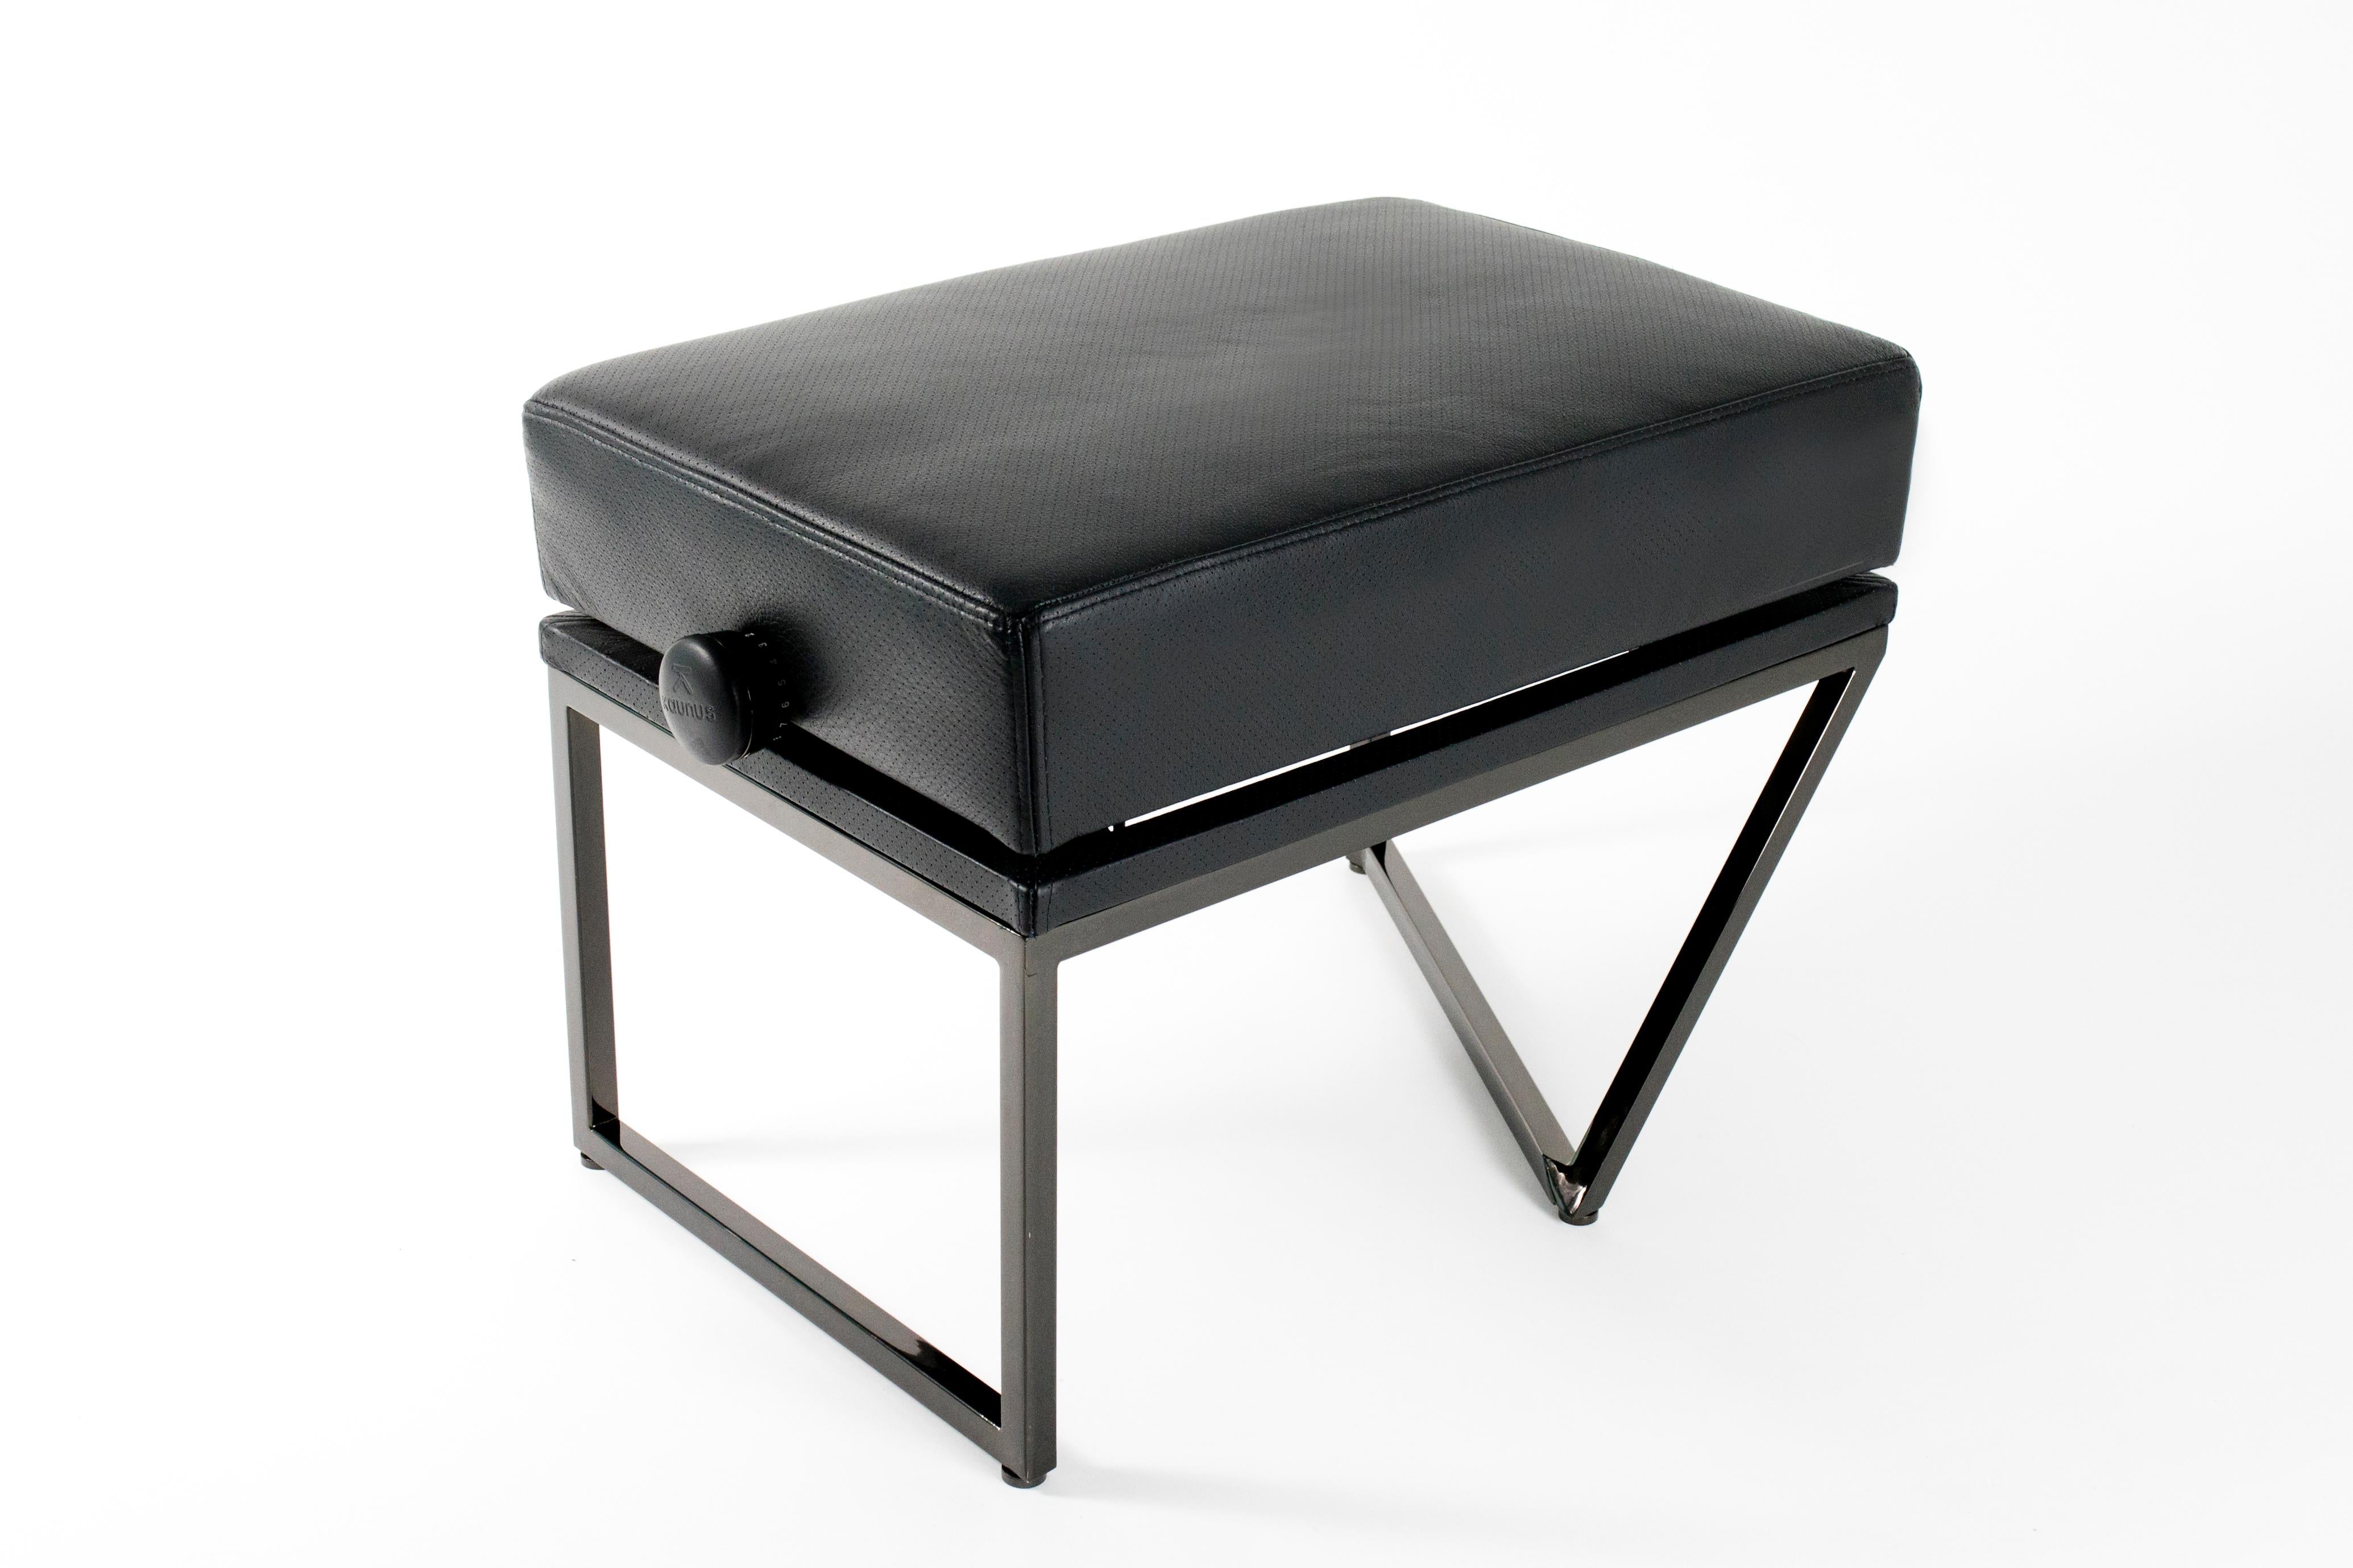 Spanish Upholstered Piano Stool Plated in Black Nickel. Height Adjustable Piano Bench For Sale